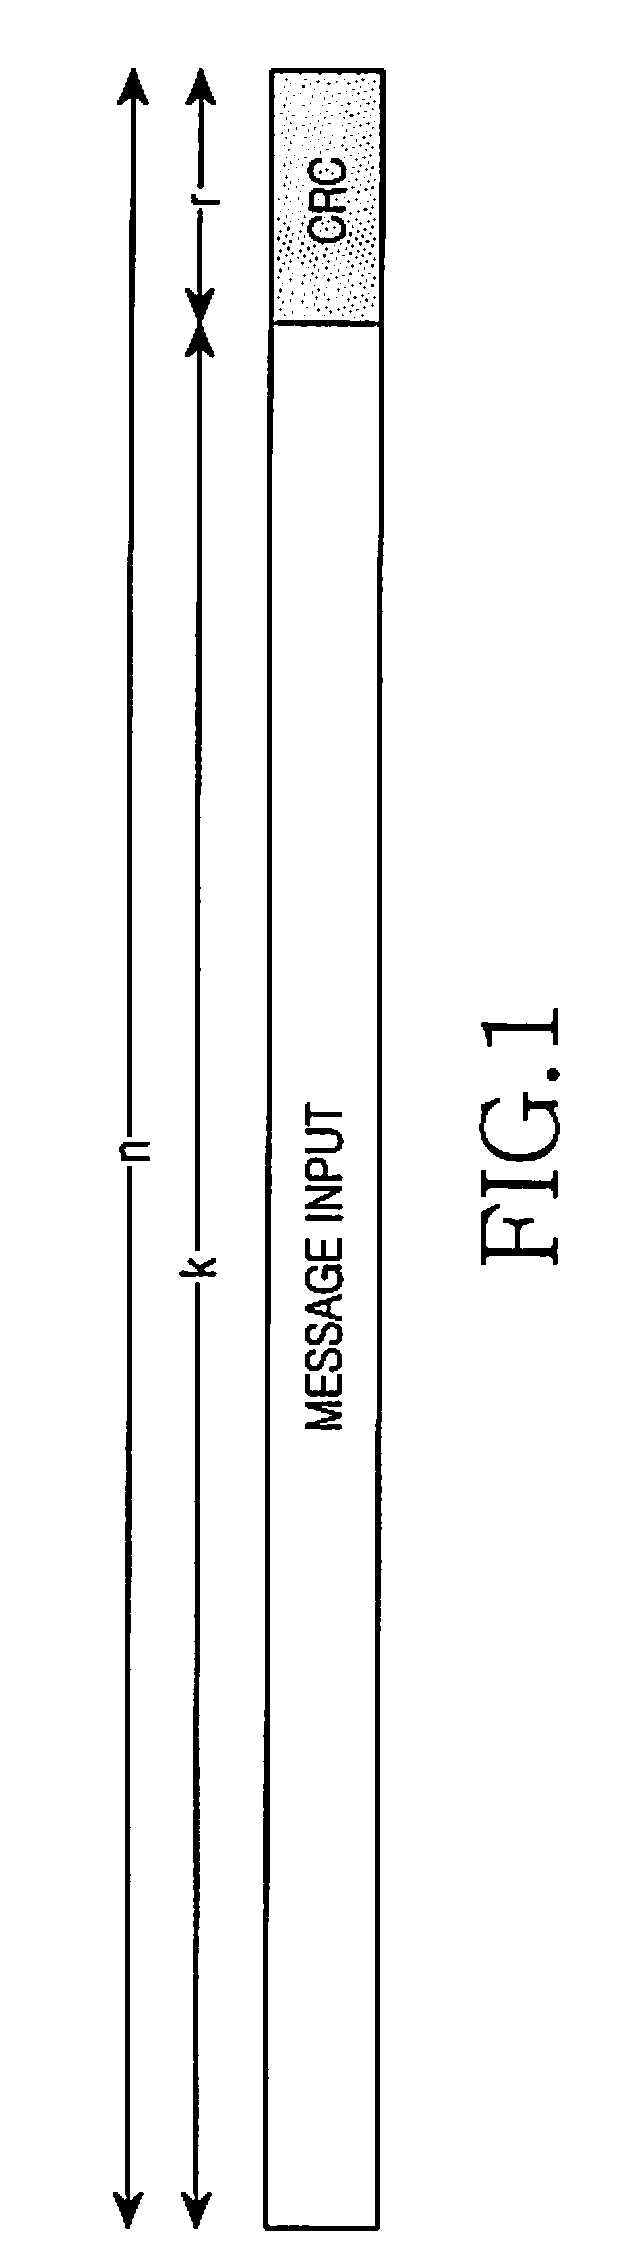 Method and apparatus for cyclic redundancy check in communication system